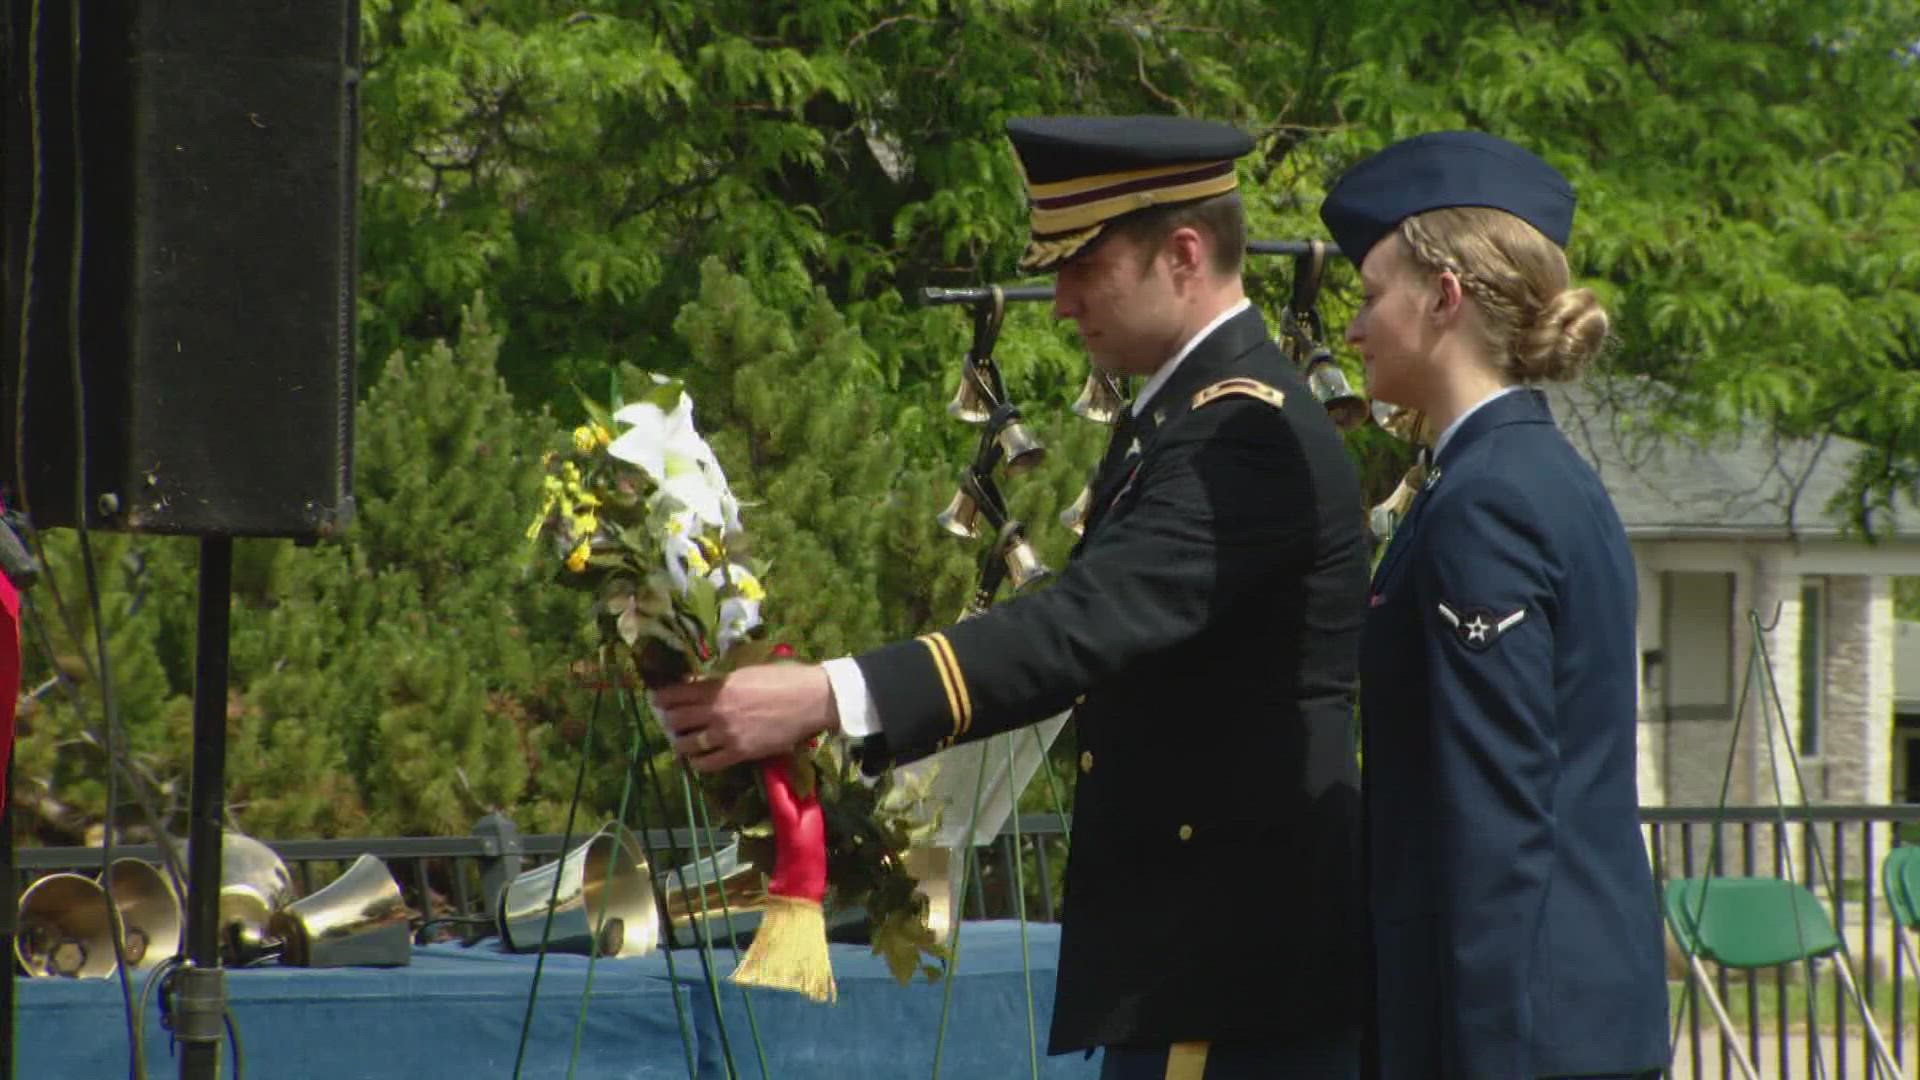 Gold Star families, military groups and veterans gathered to honor the sacrifice of fallen military heroes.